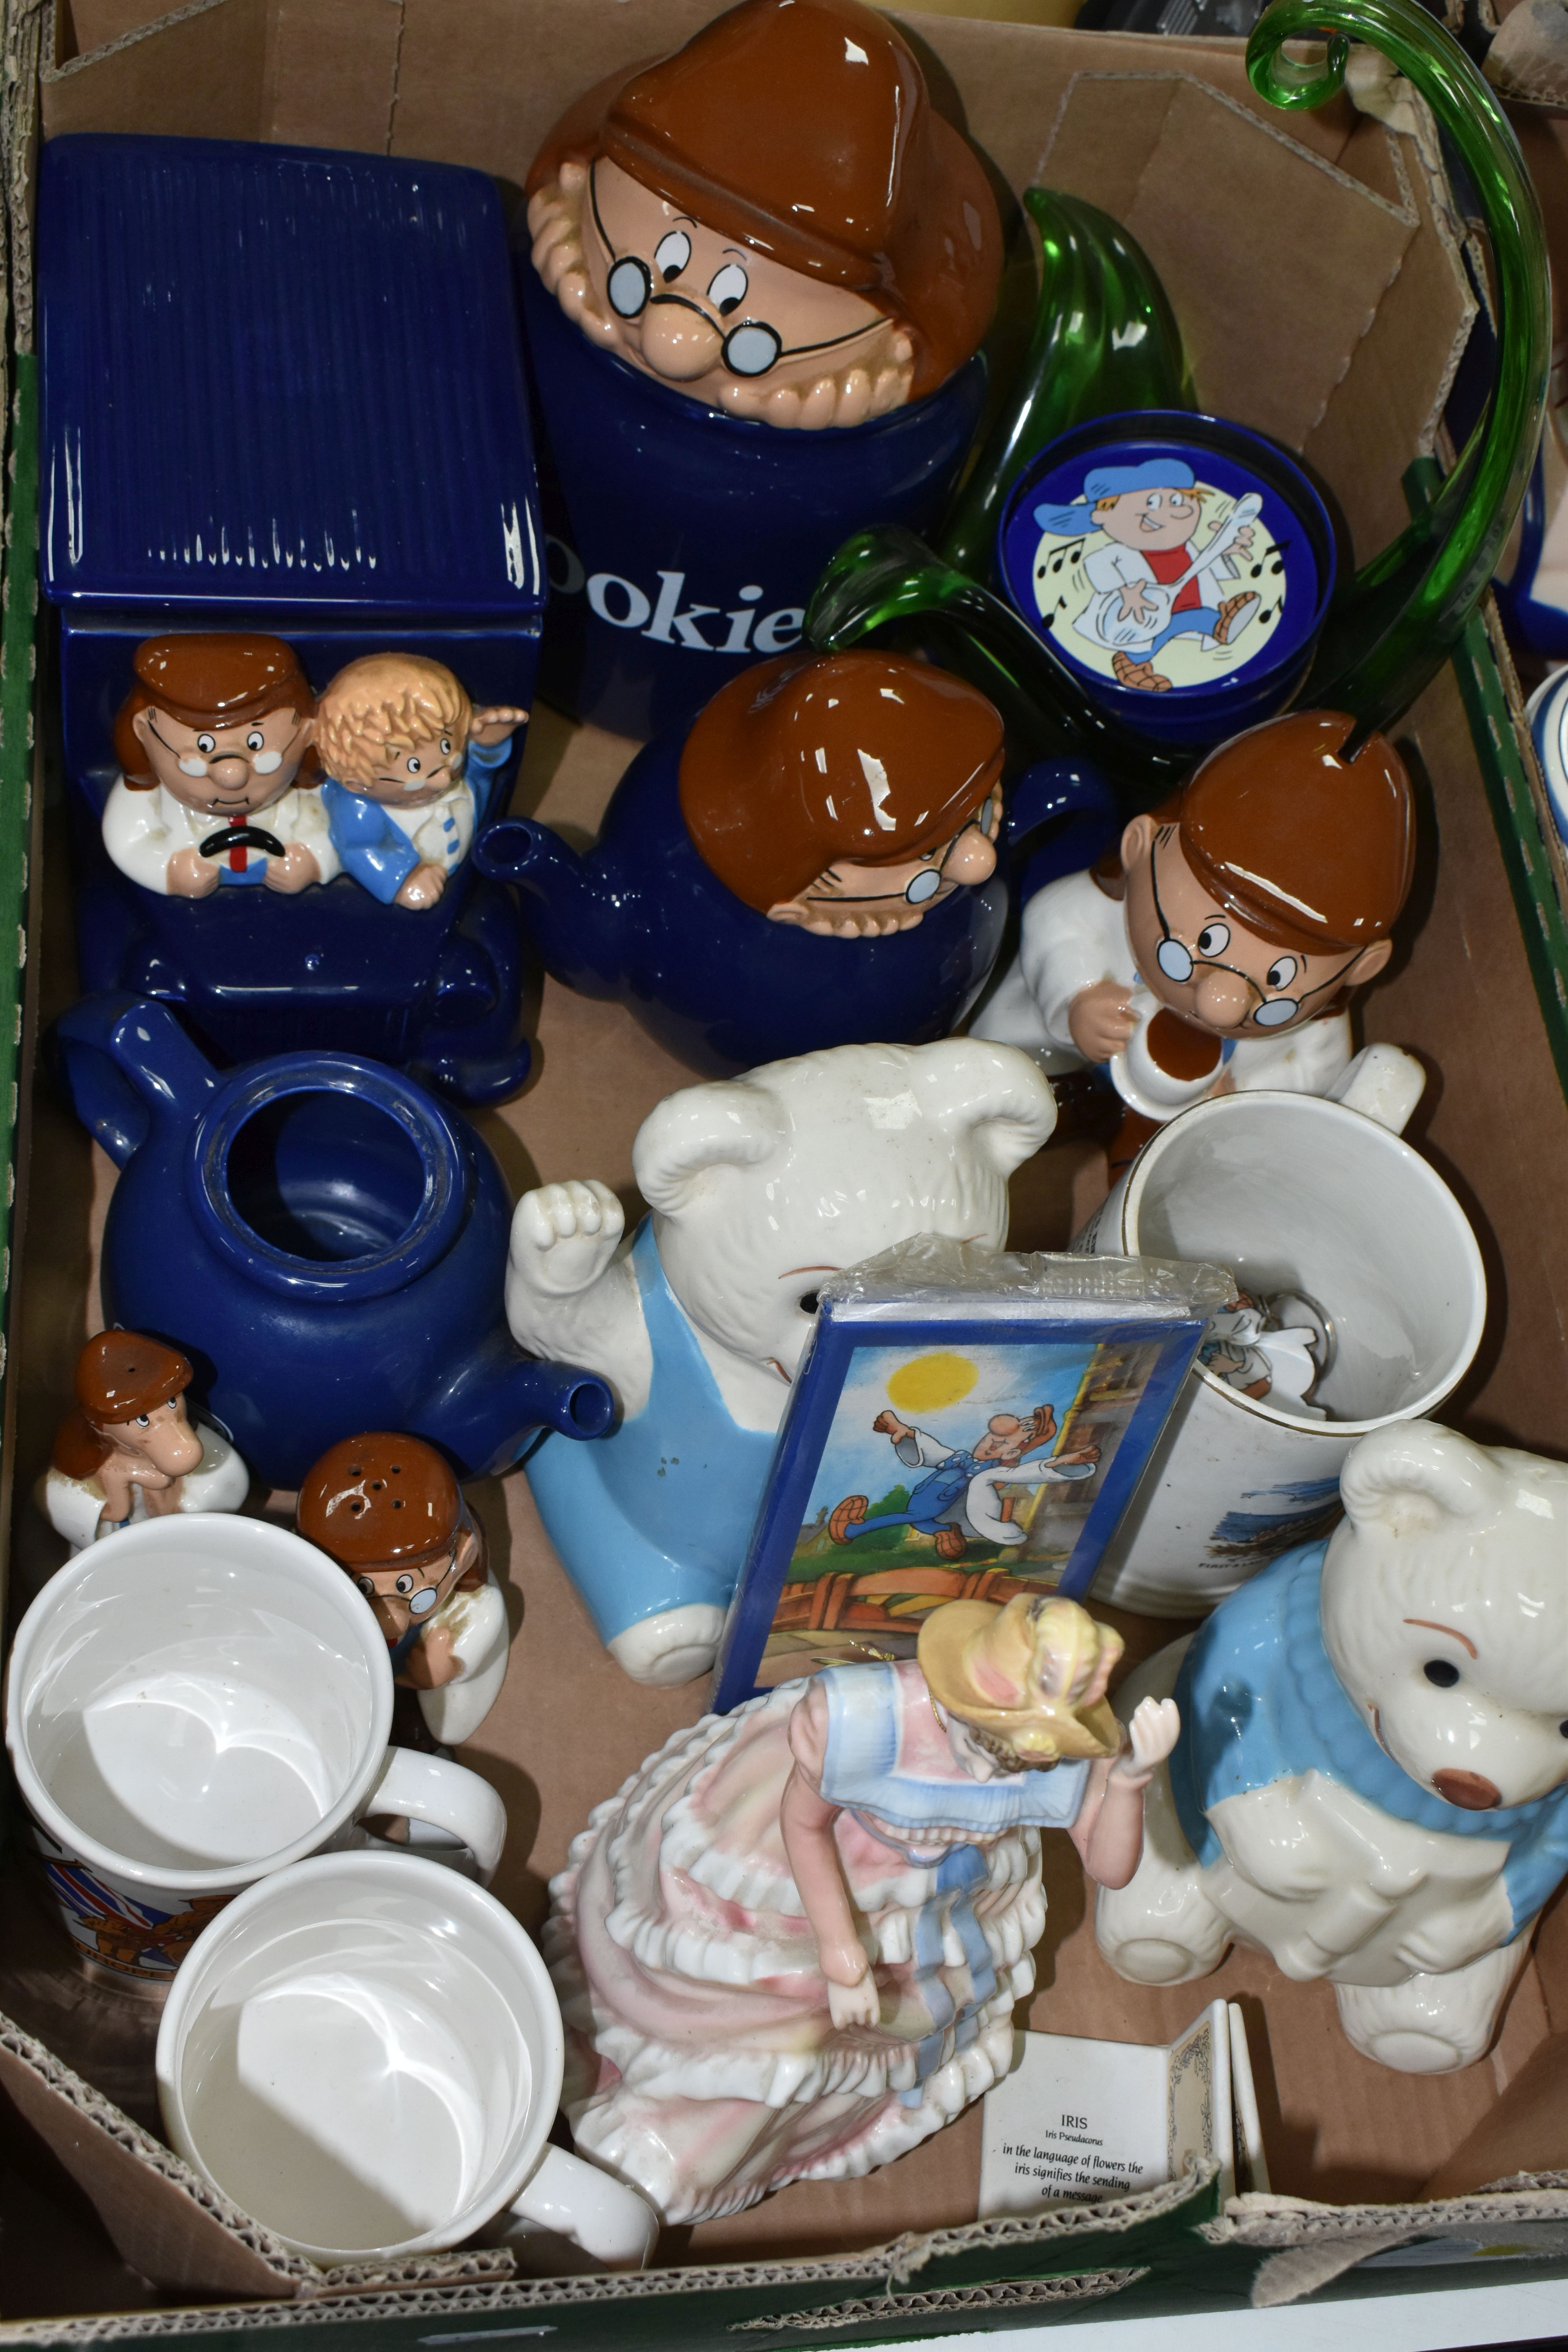 TWO BOXES OF TETLEY TEA NOVELTY CERAMICS, WADE NATWEST PIGGY BANKS, ASSORTED DELFT POTTERY - Image 3 of 3